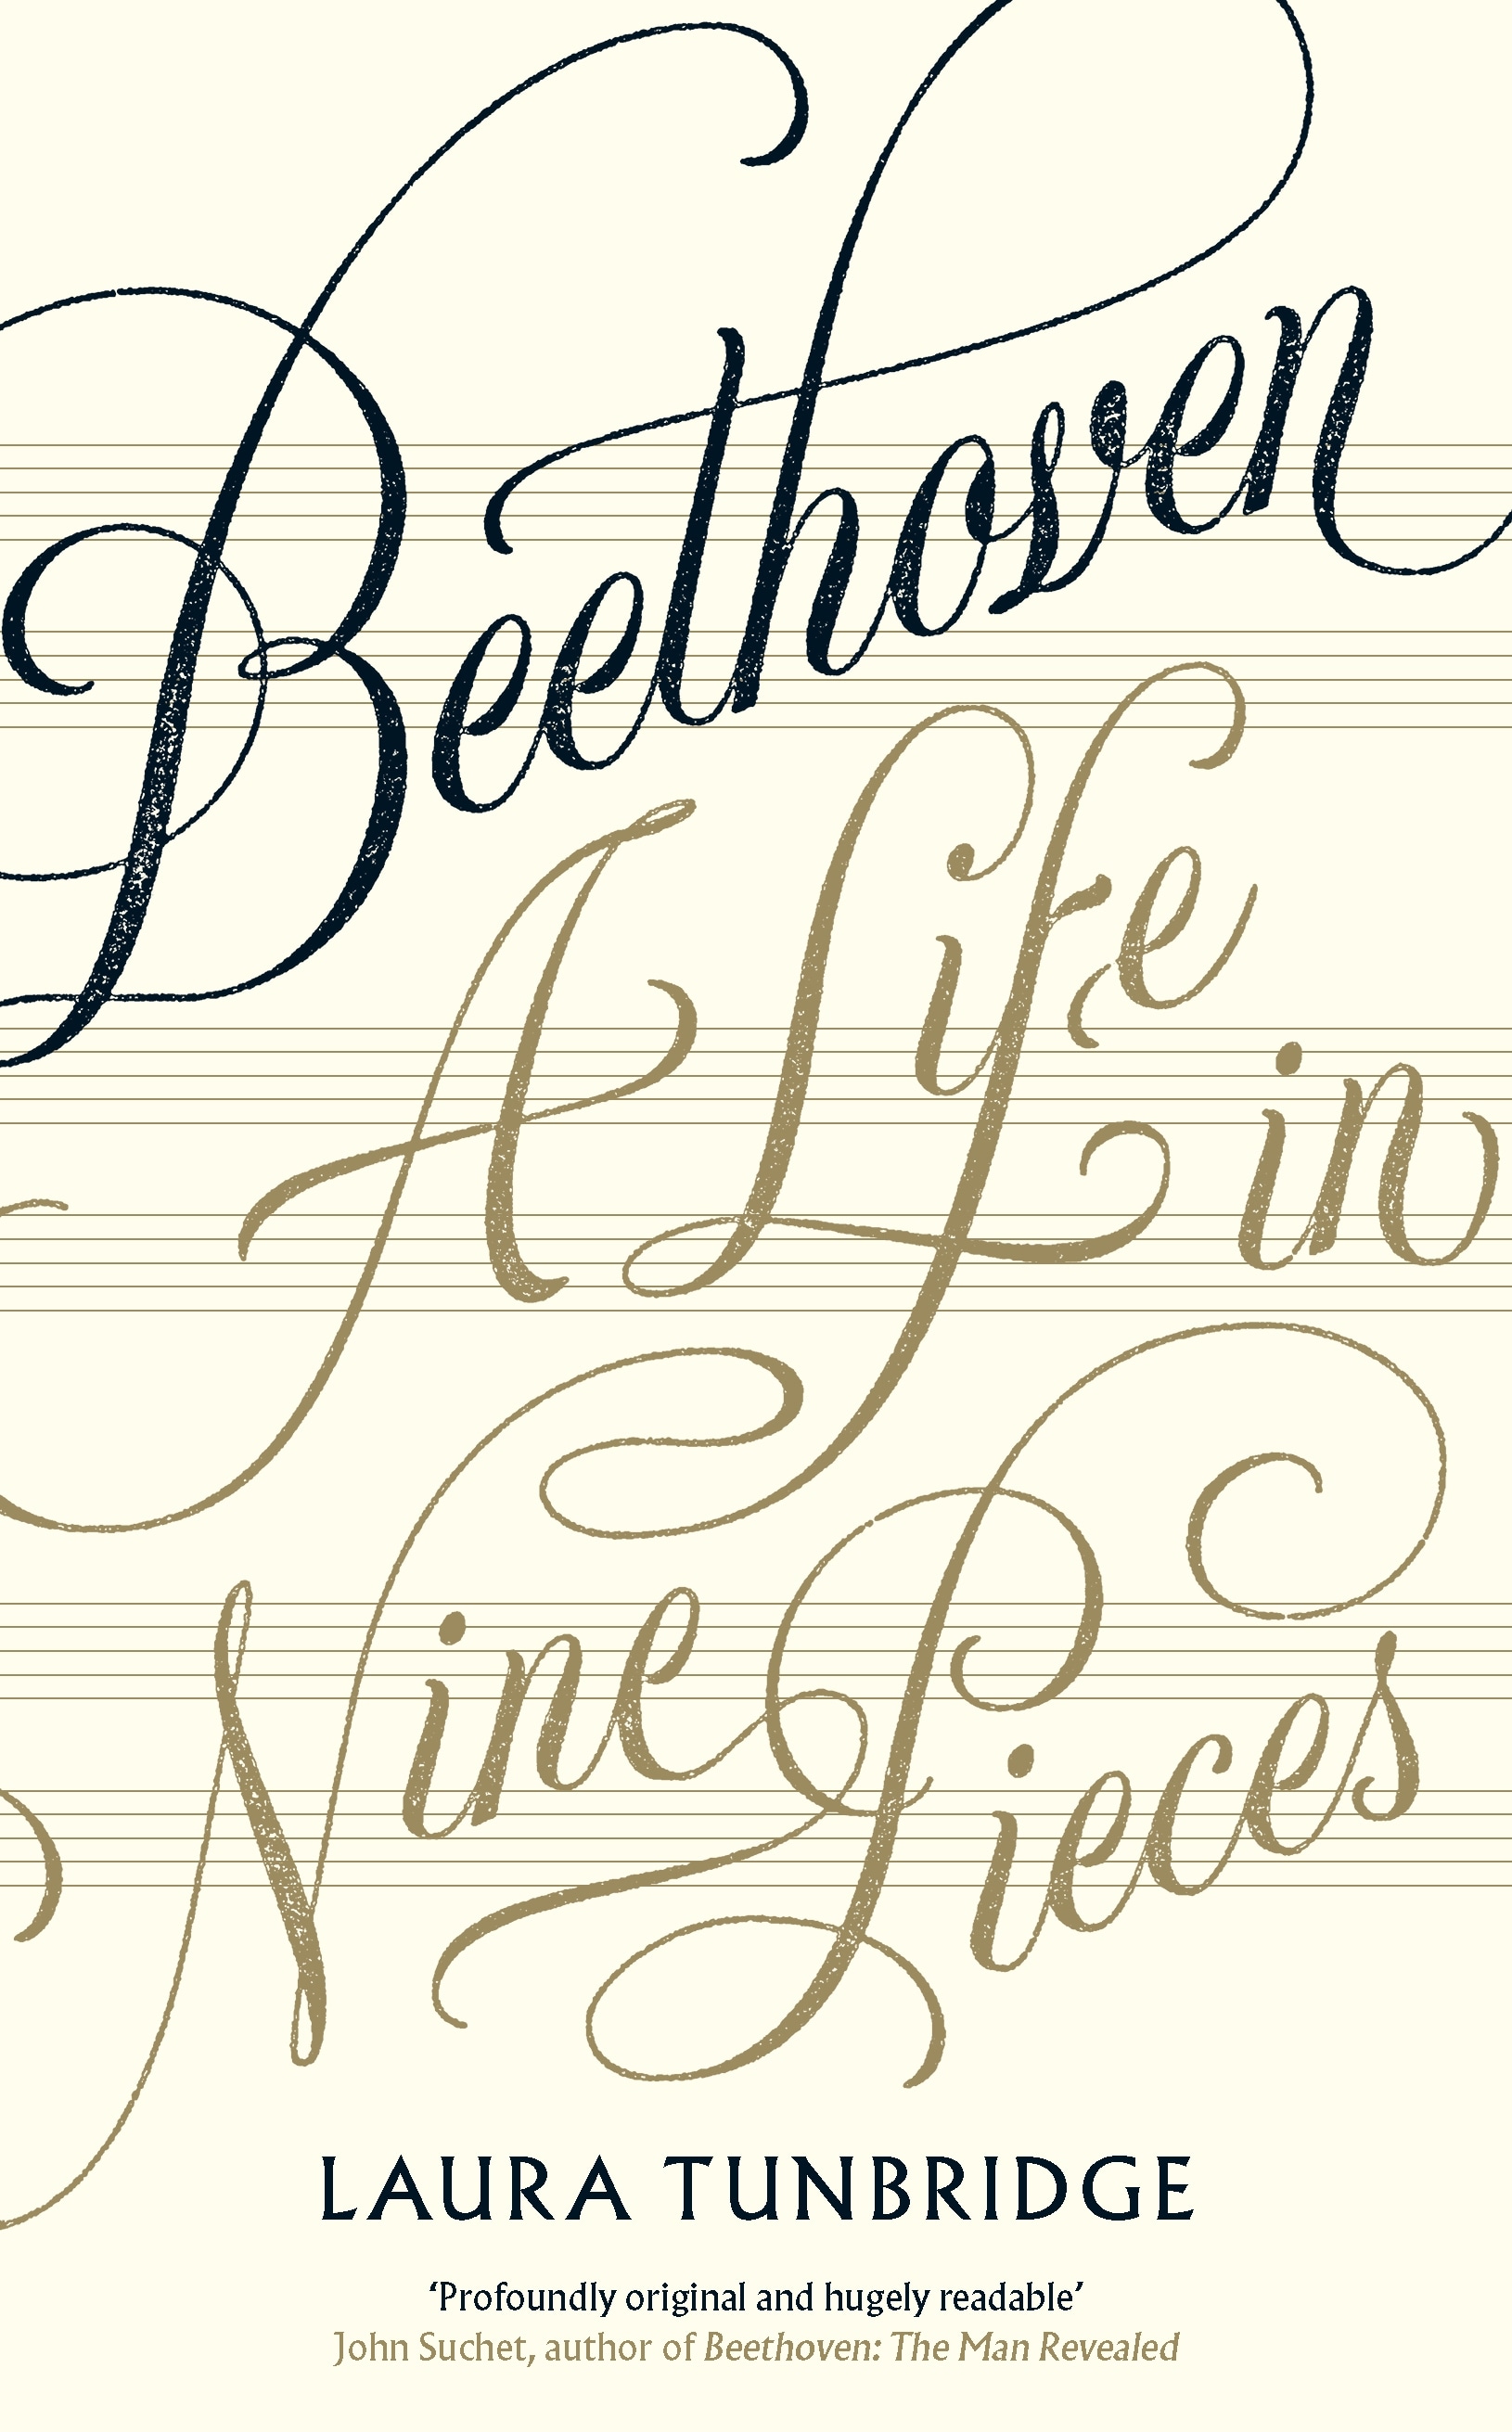 Book “Beethoven” by Laura Tunbridge — July 16, 2020